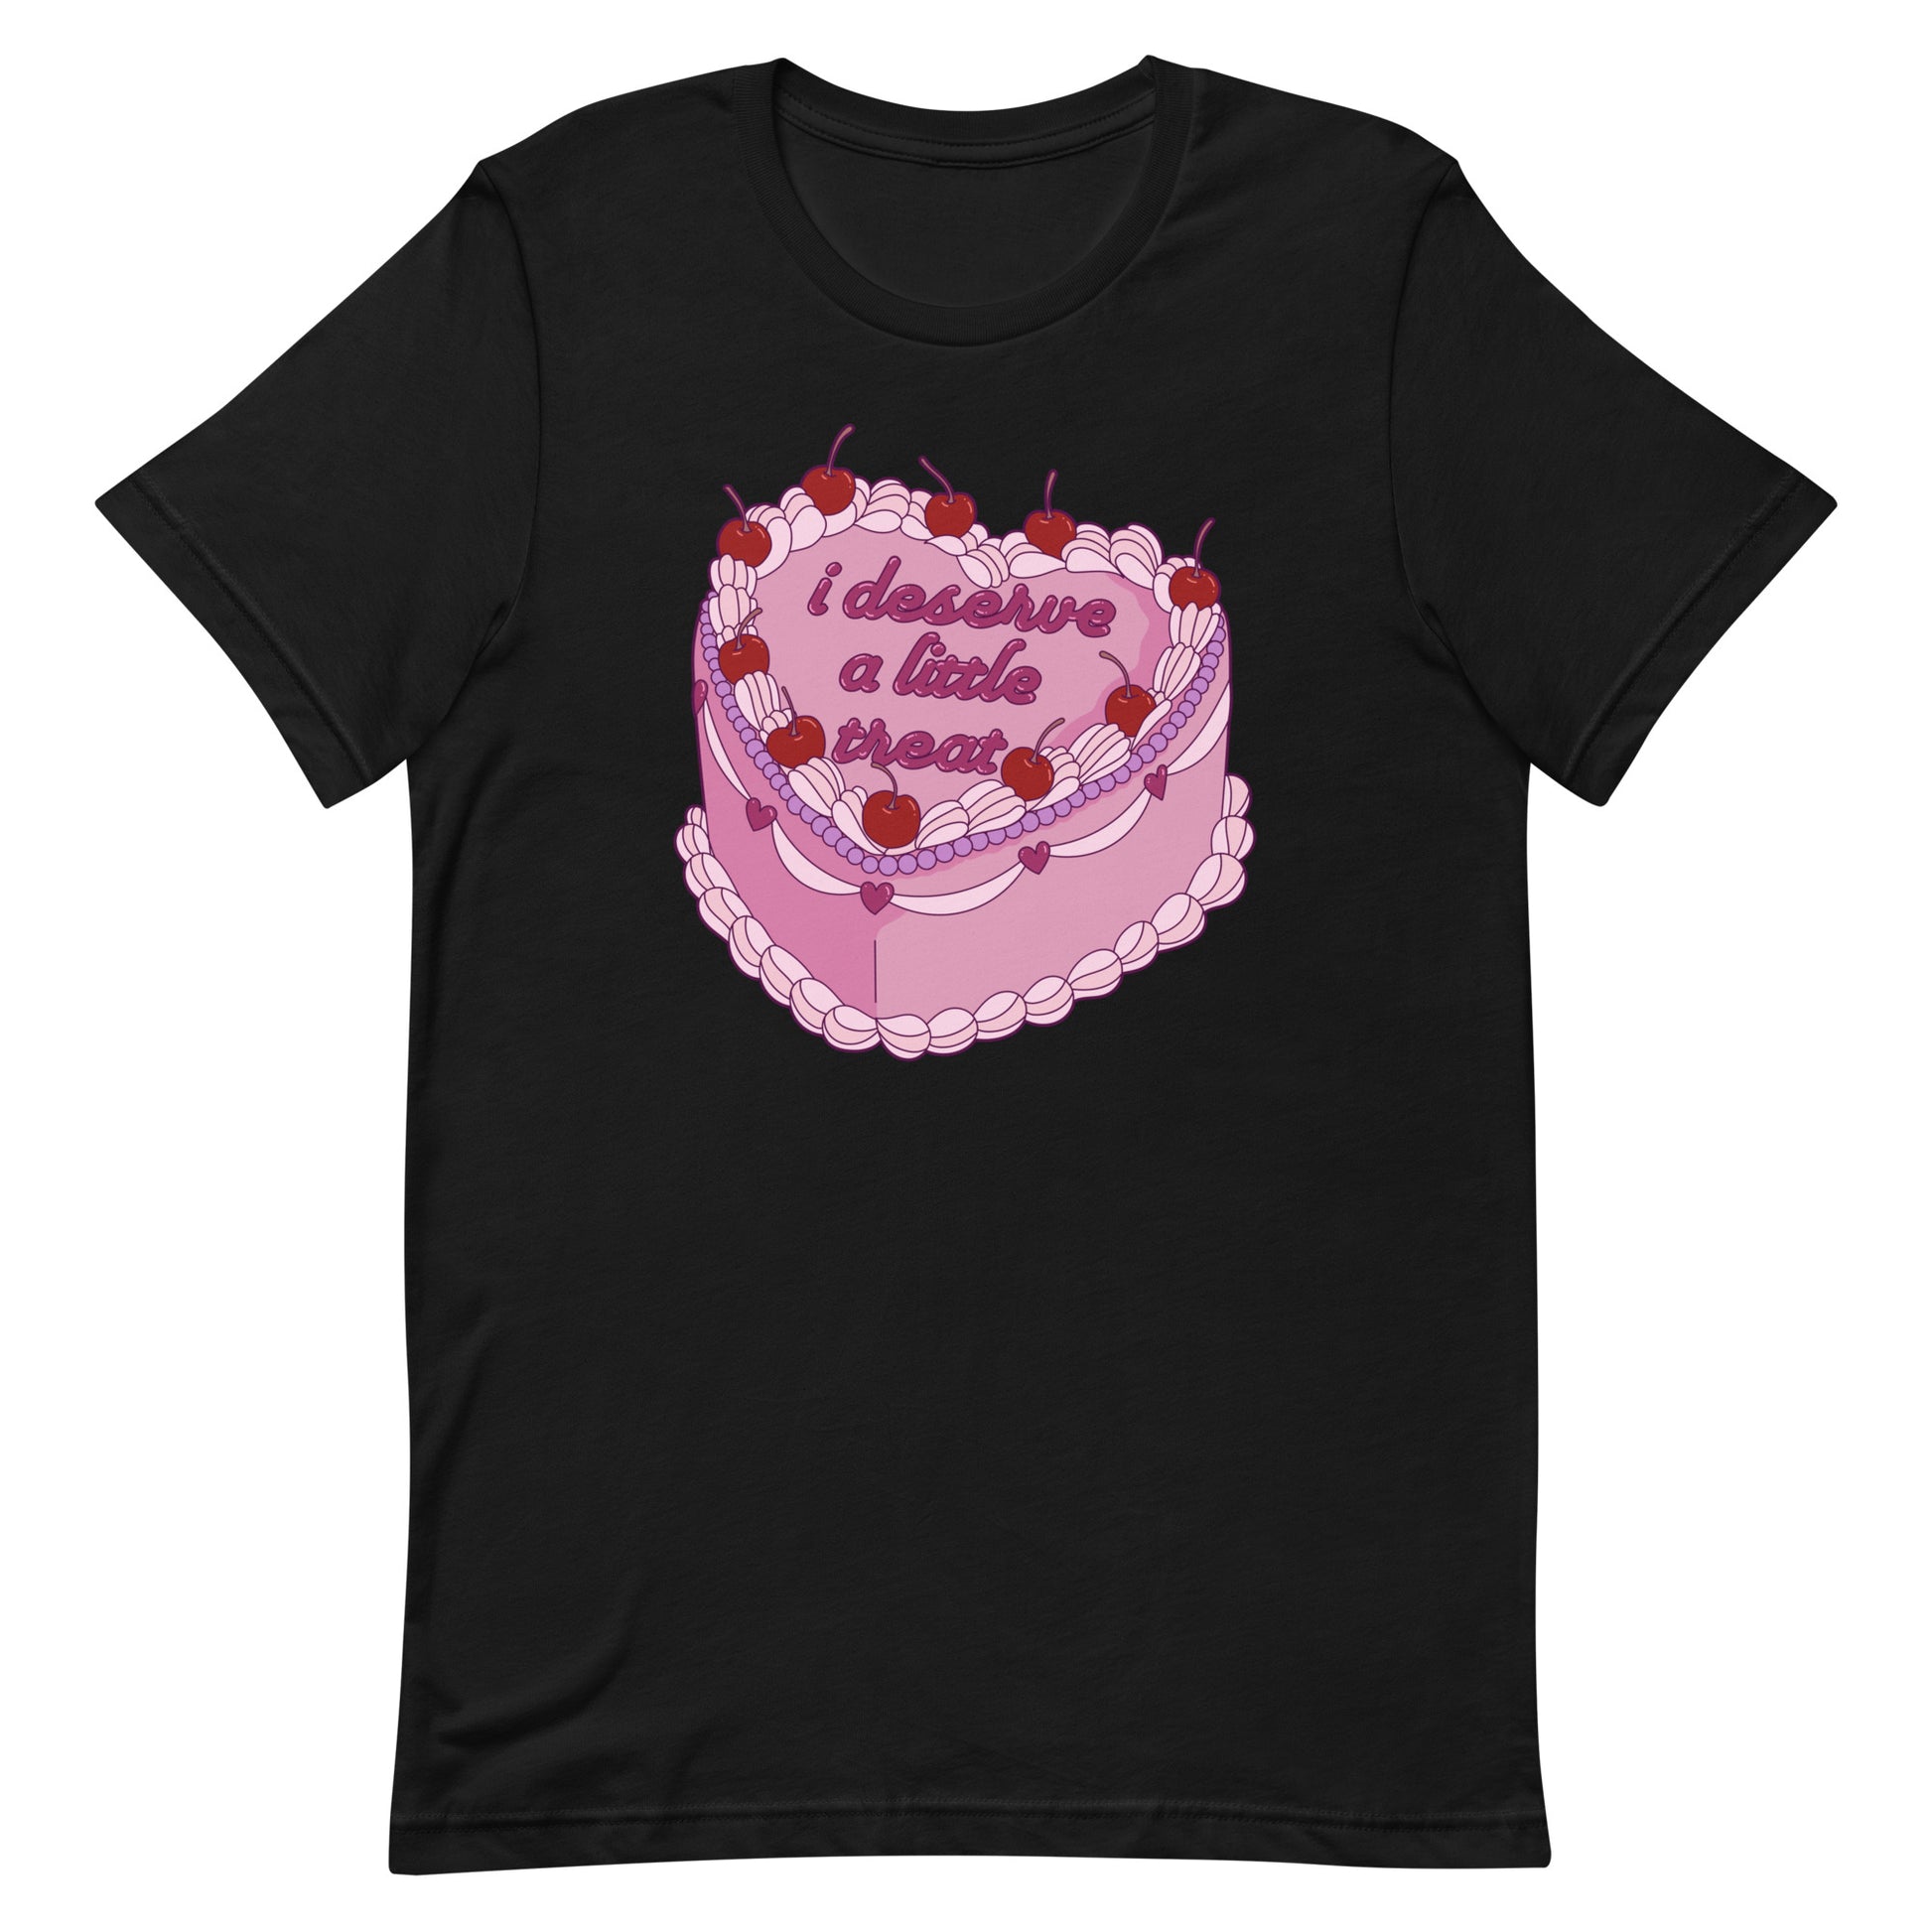 A black crewneck t-shirt featuring an illustration of an elaborately decorated pink cake. Icing on the cake reads "i deserve a little treat" in a cursive font.